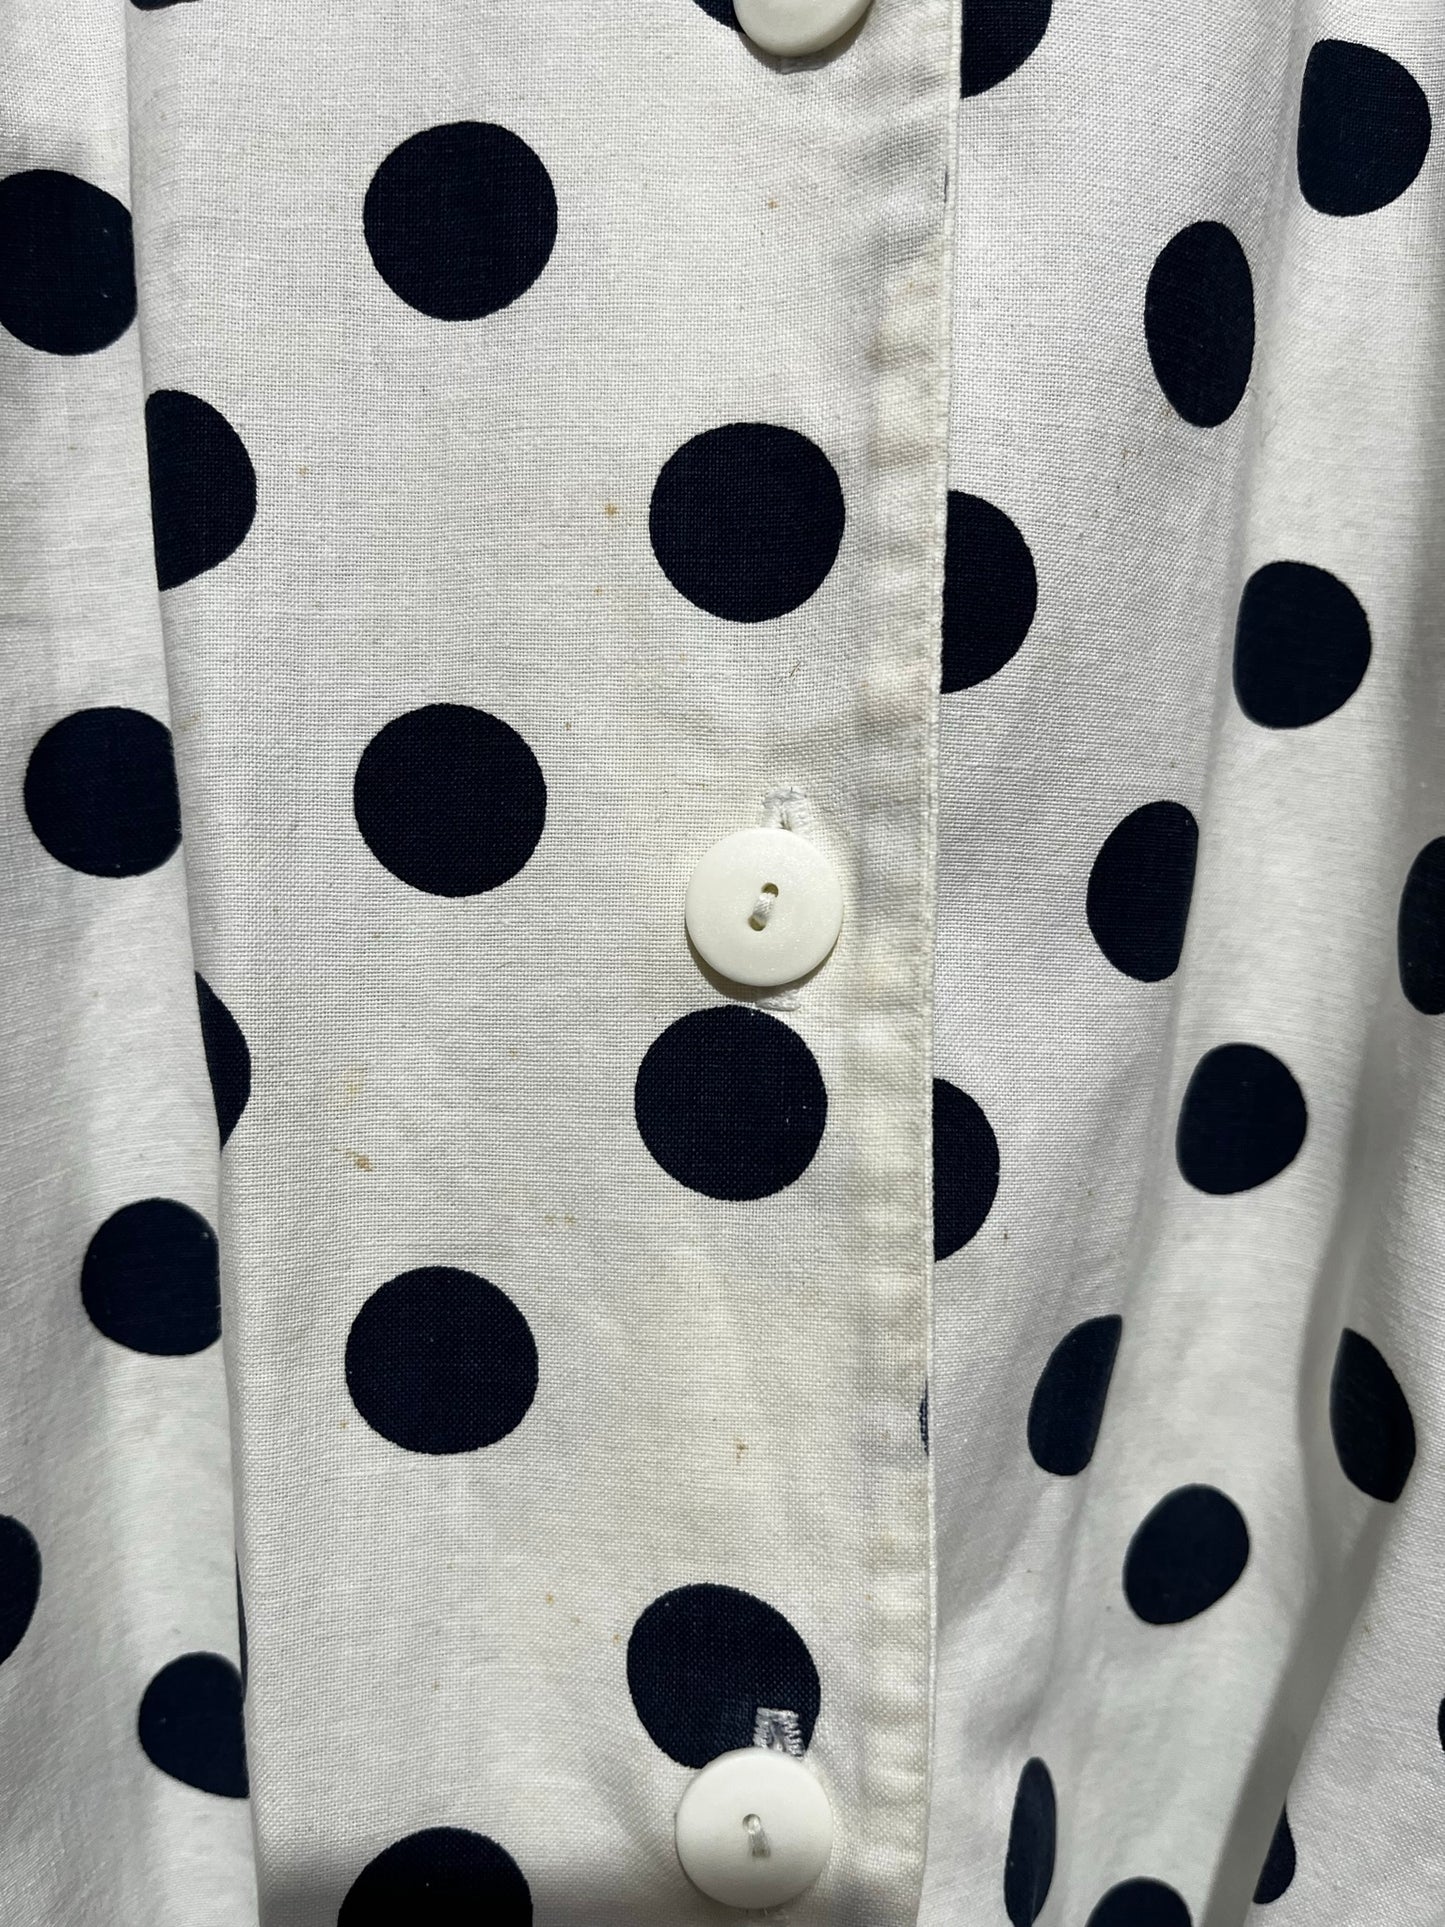 Vintage White & spotted Short sleeved shirt blouse Size 22 - MARKED